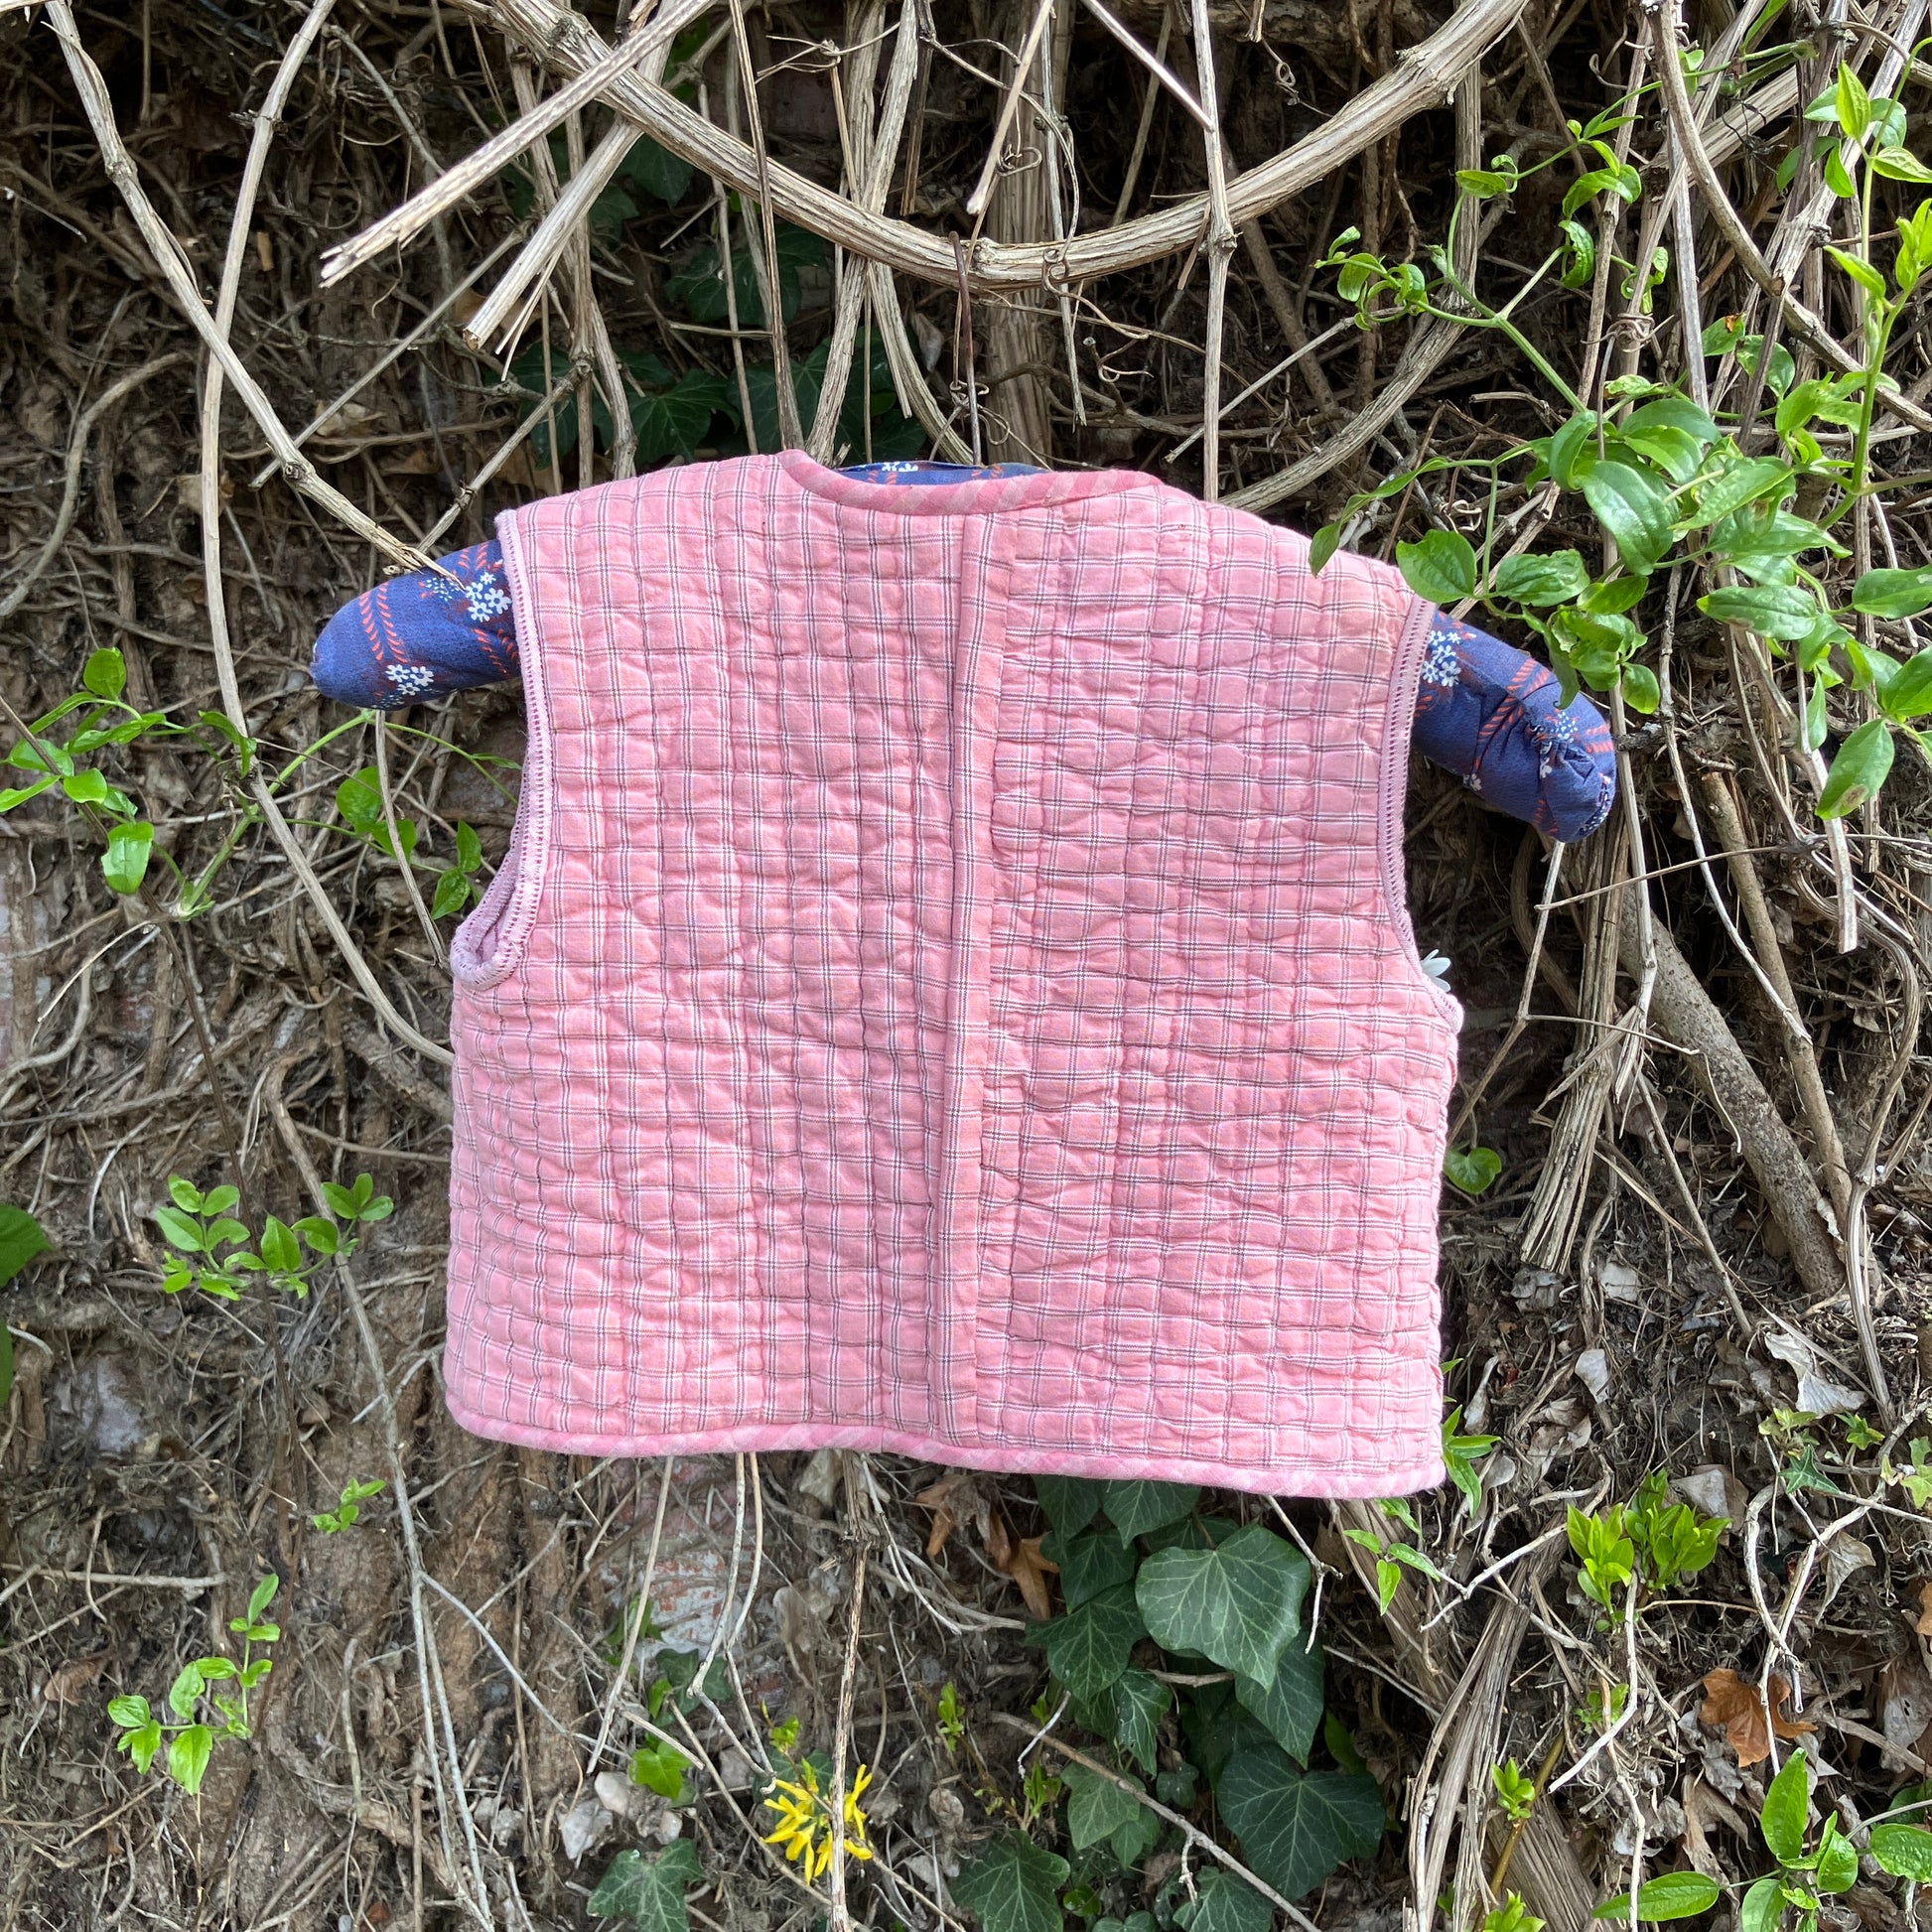 kids vest/gilet/waistcoat made from offcuts of a reclaimed pink quilt. Shown hanging on a blue vintage hanger in some foliage with some wild flowers in one of the pockets (back view)